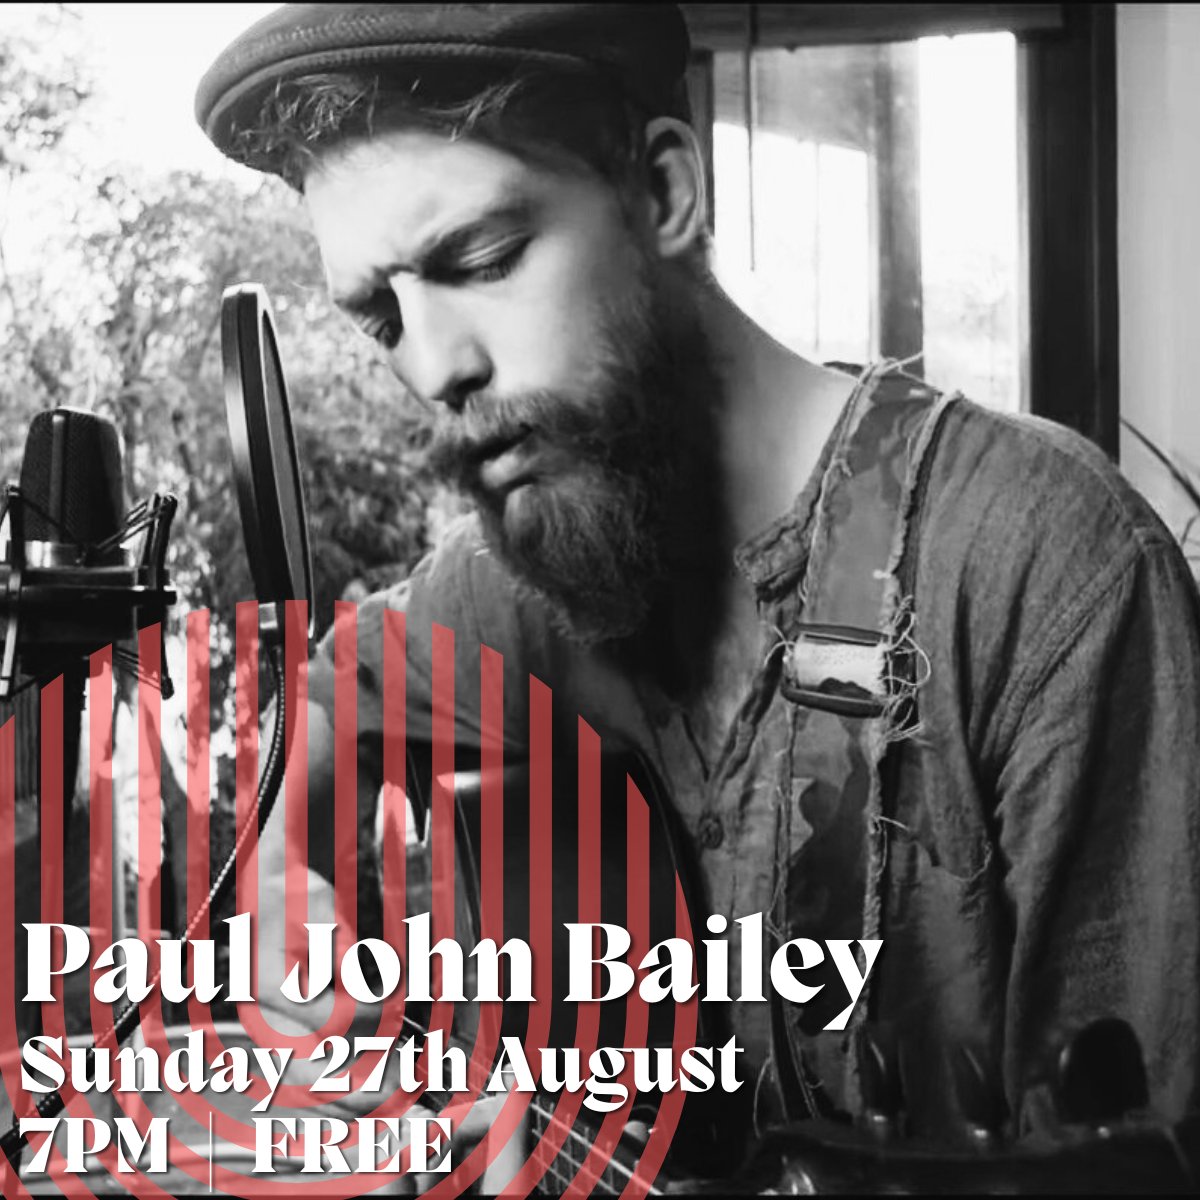 This Sunday we welcome Paul John Bailey to the Alma! Country-tinged folk and blues with a mix of original songs and covers from local guitarist singer-songwriter Bailey. As always, music is free to attend and we'll have pizzas from 6pm with bar til 10pm. See you there! 🎶 🍕 🍻